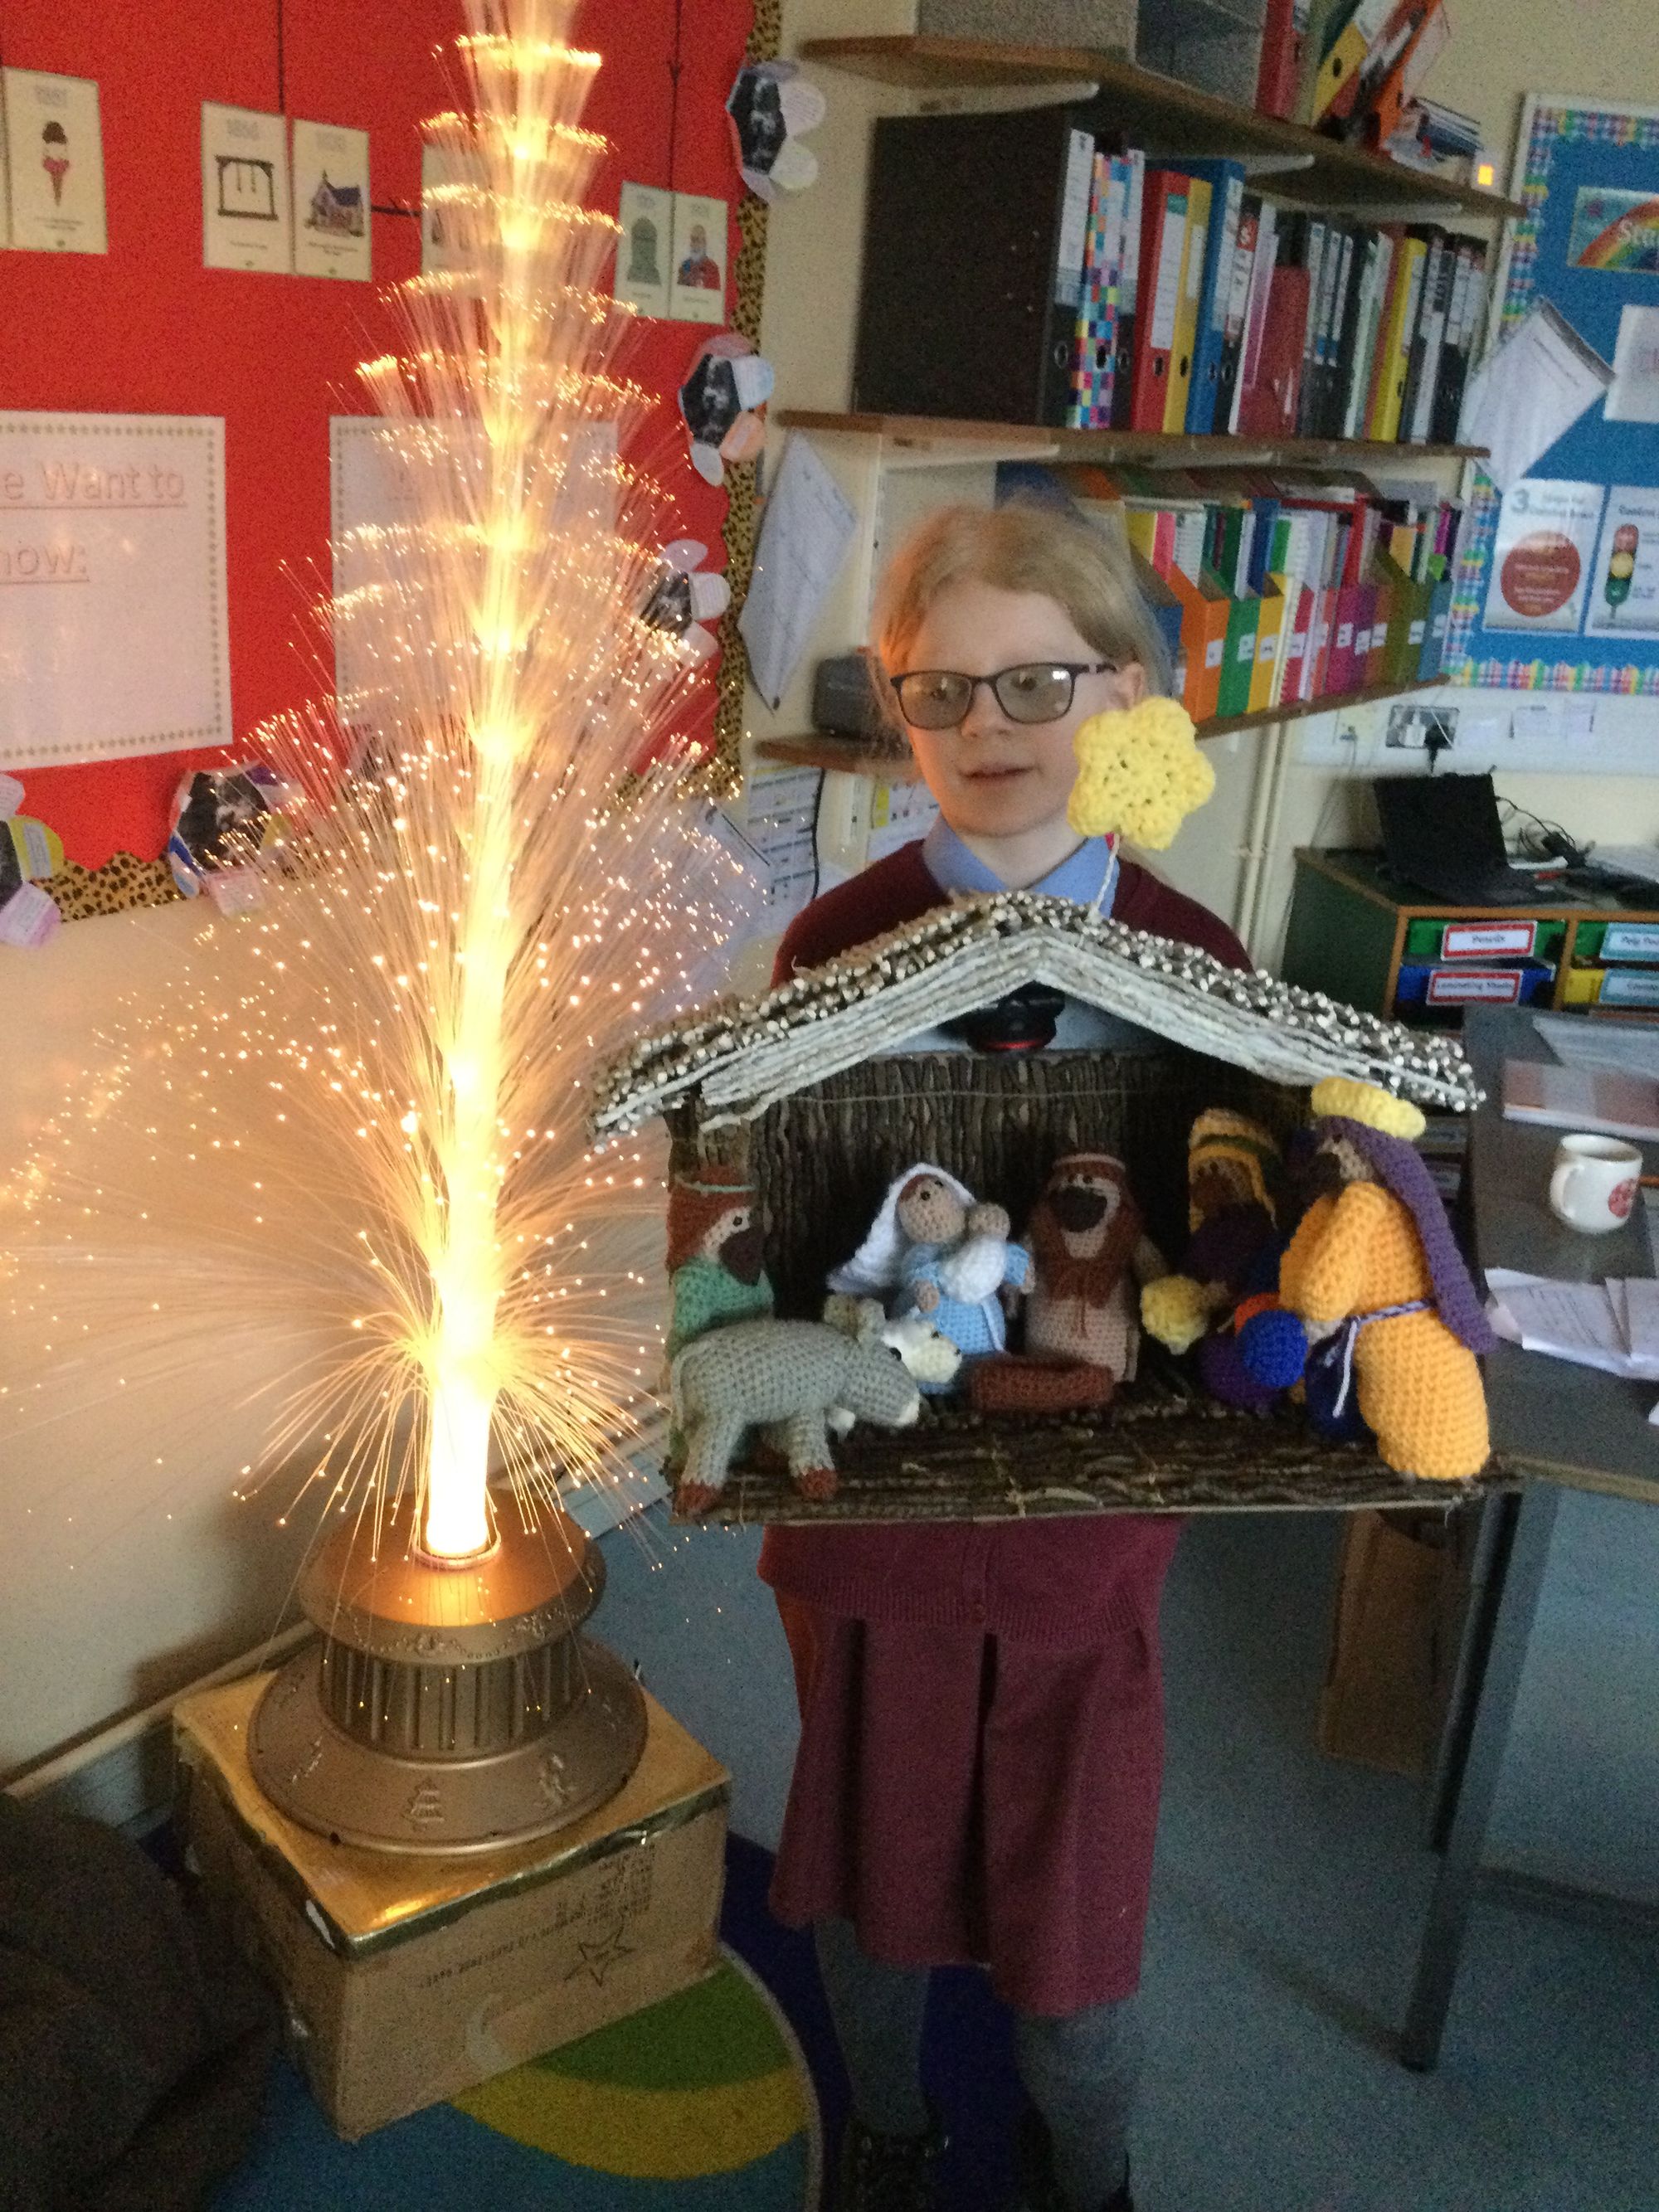 Beautiful Crib created and kindly donated to our school by Maggie and her mum. What talented kids (and mums) we have